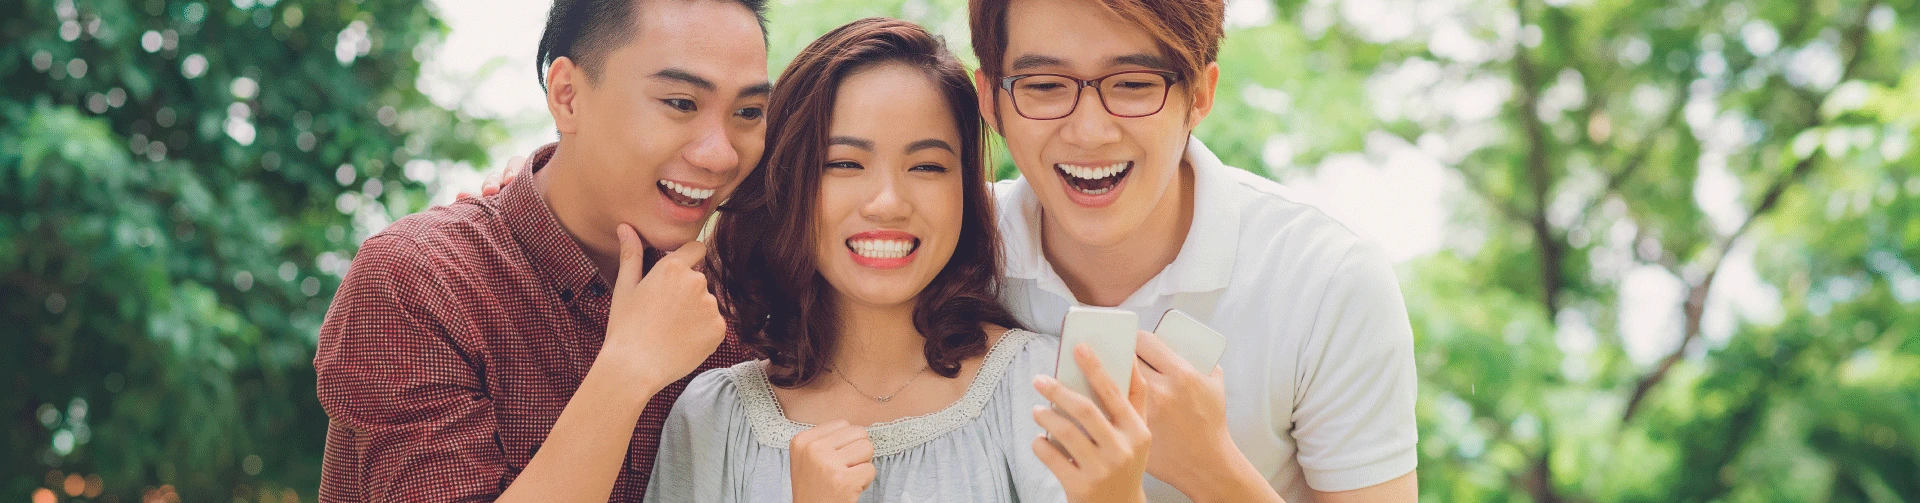 Three people taking a selfie with smiles on their faces while looking at a smartphone.